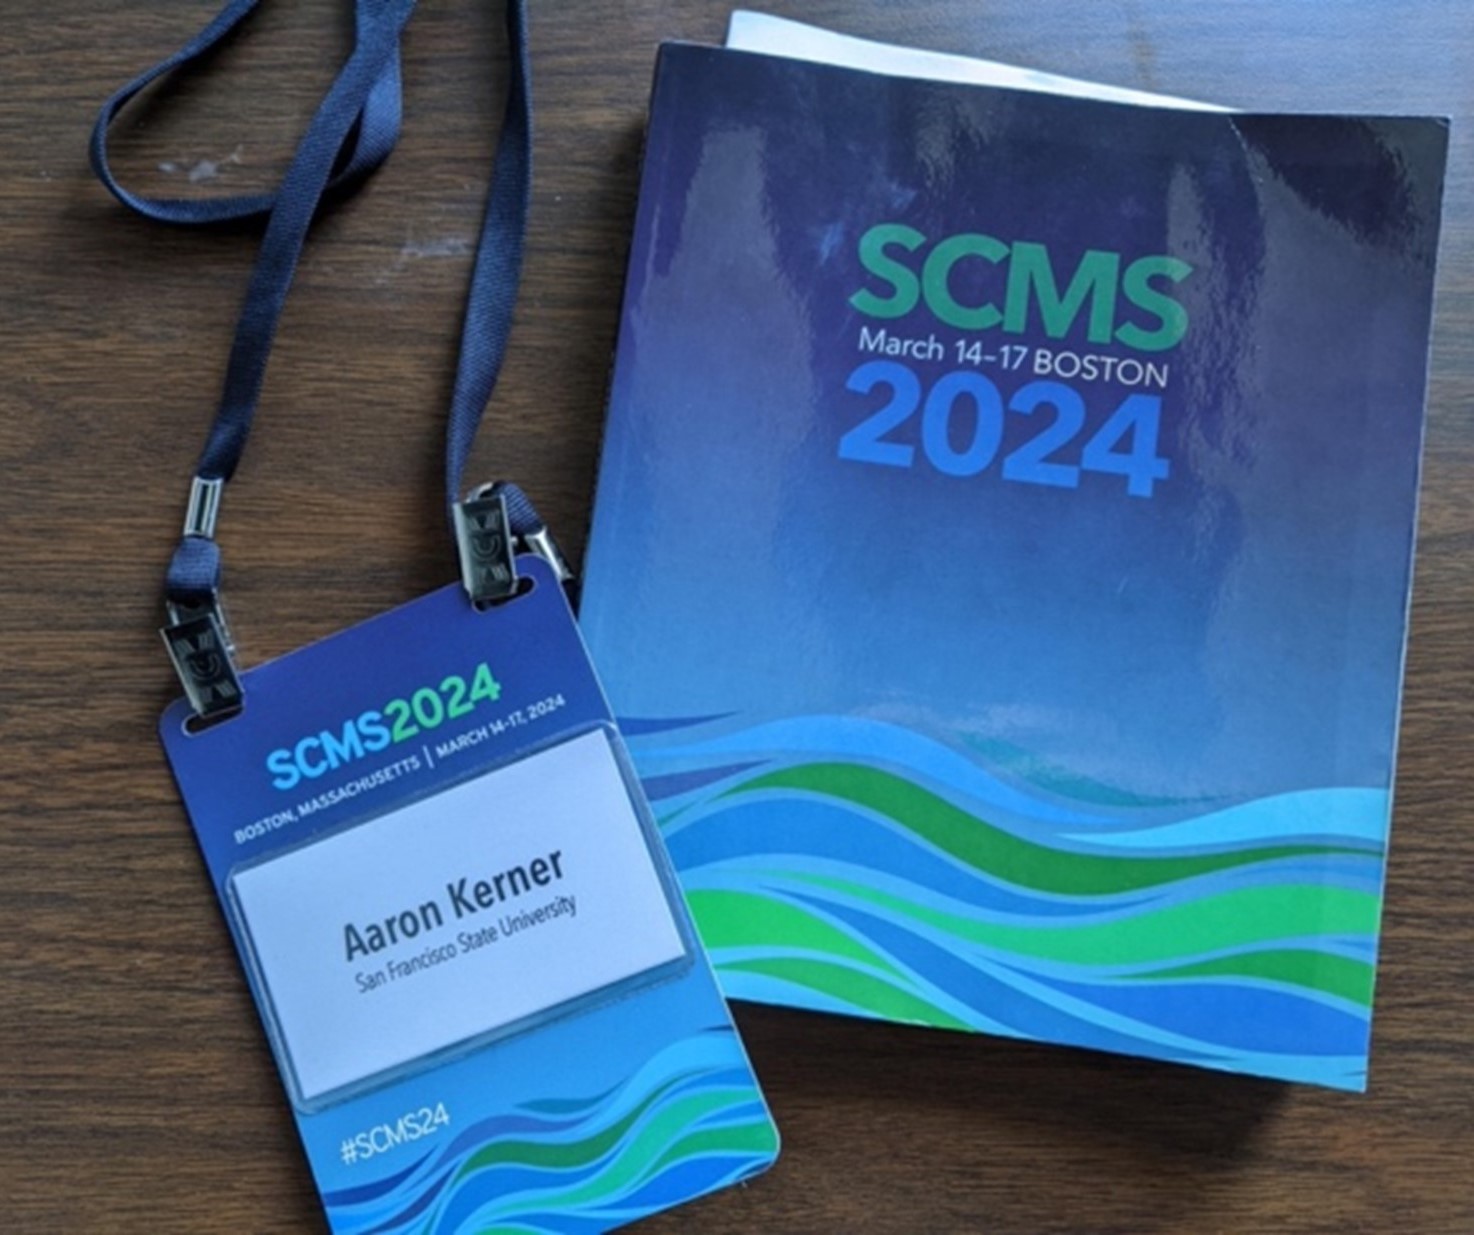 The Society for Cinema and Media Studies Conference matching blue and green booklet and lanyard